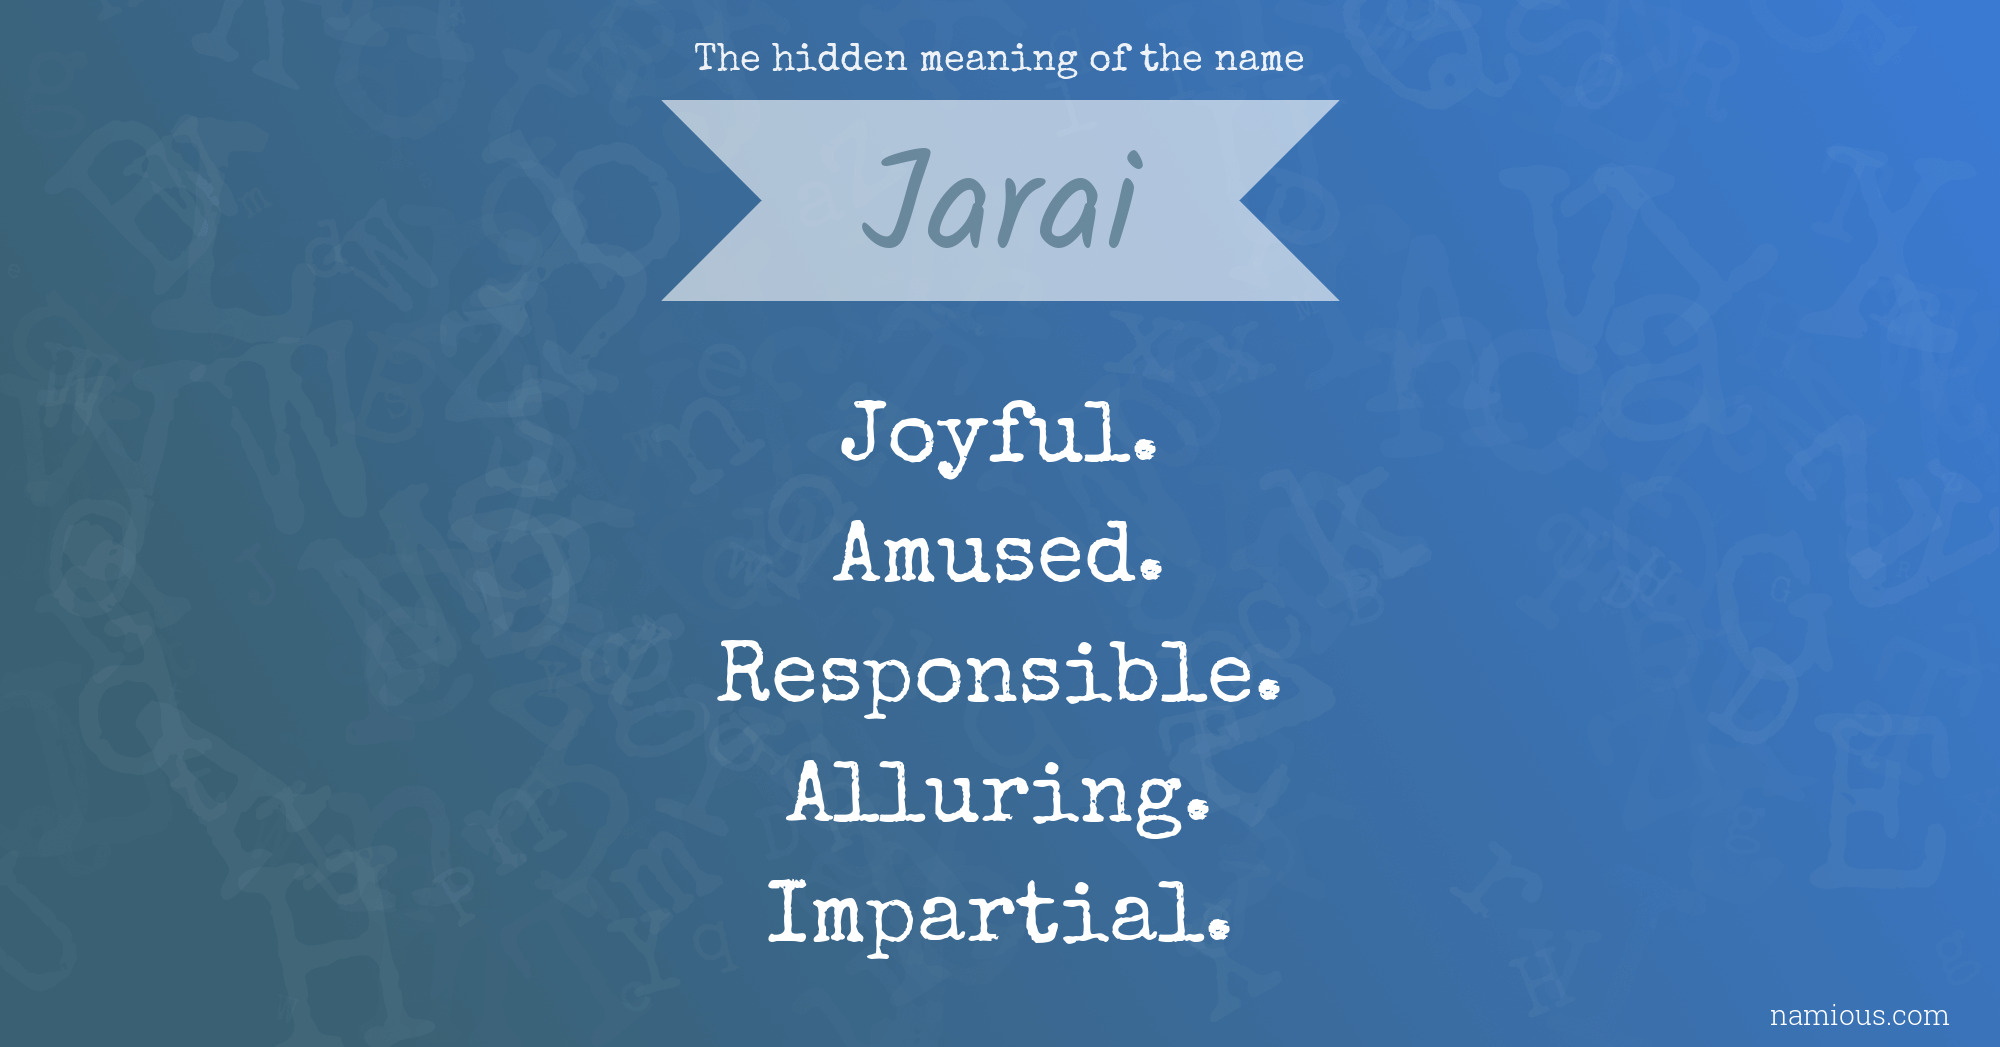 The hidden meaning of the name Jarai